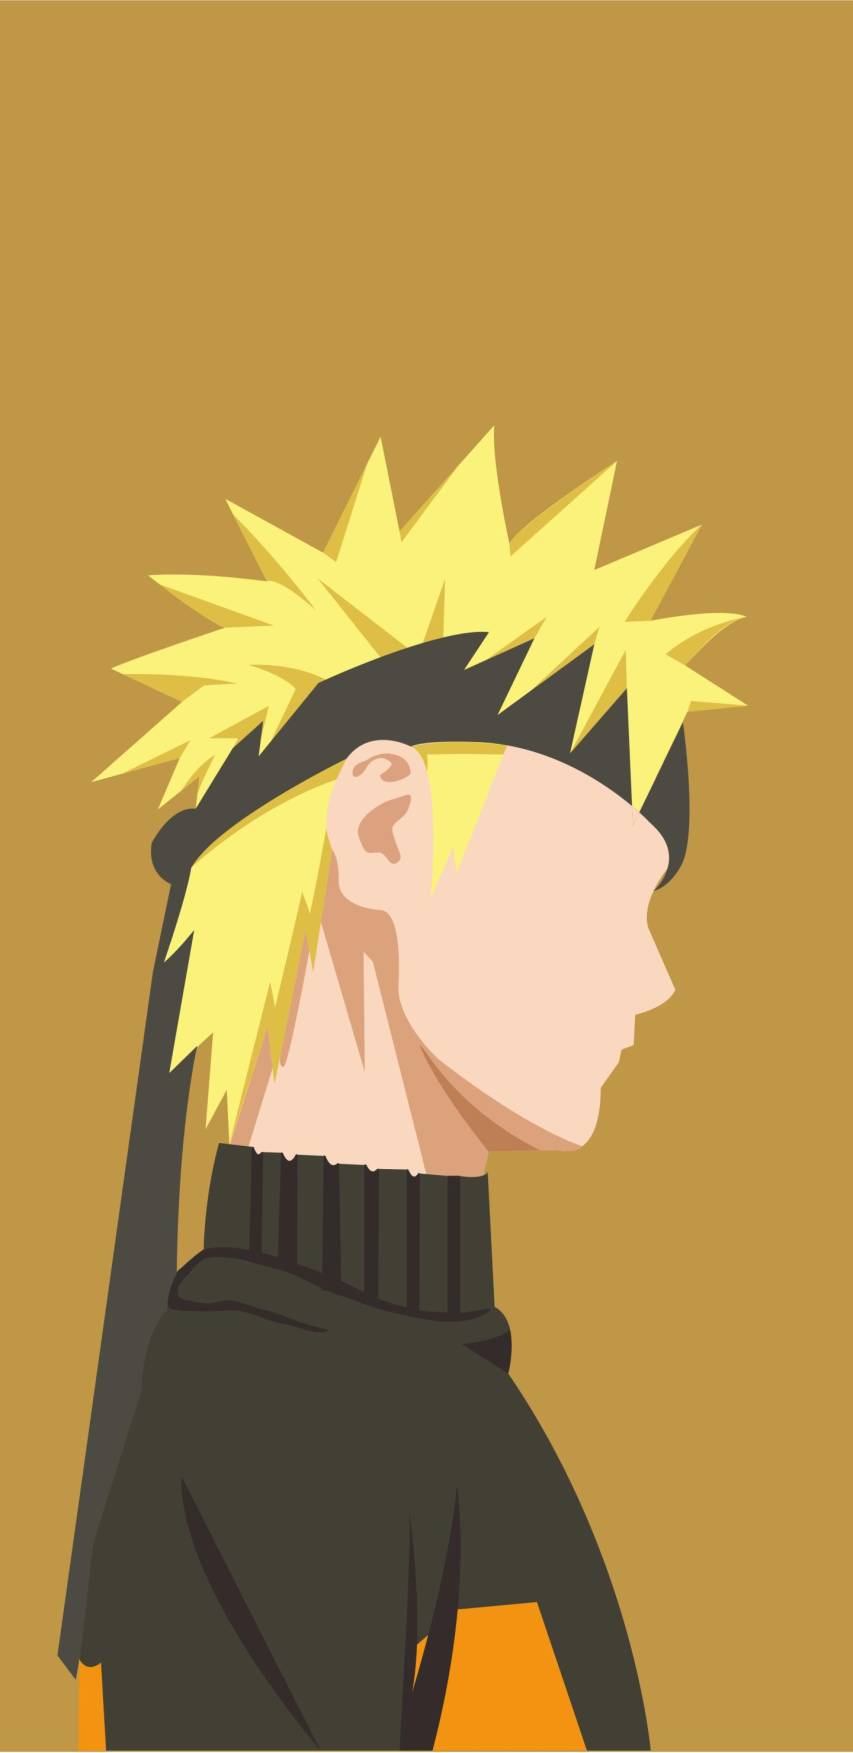 Naruto Wallpaper for iPhone and Android Devices